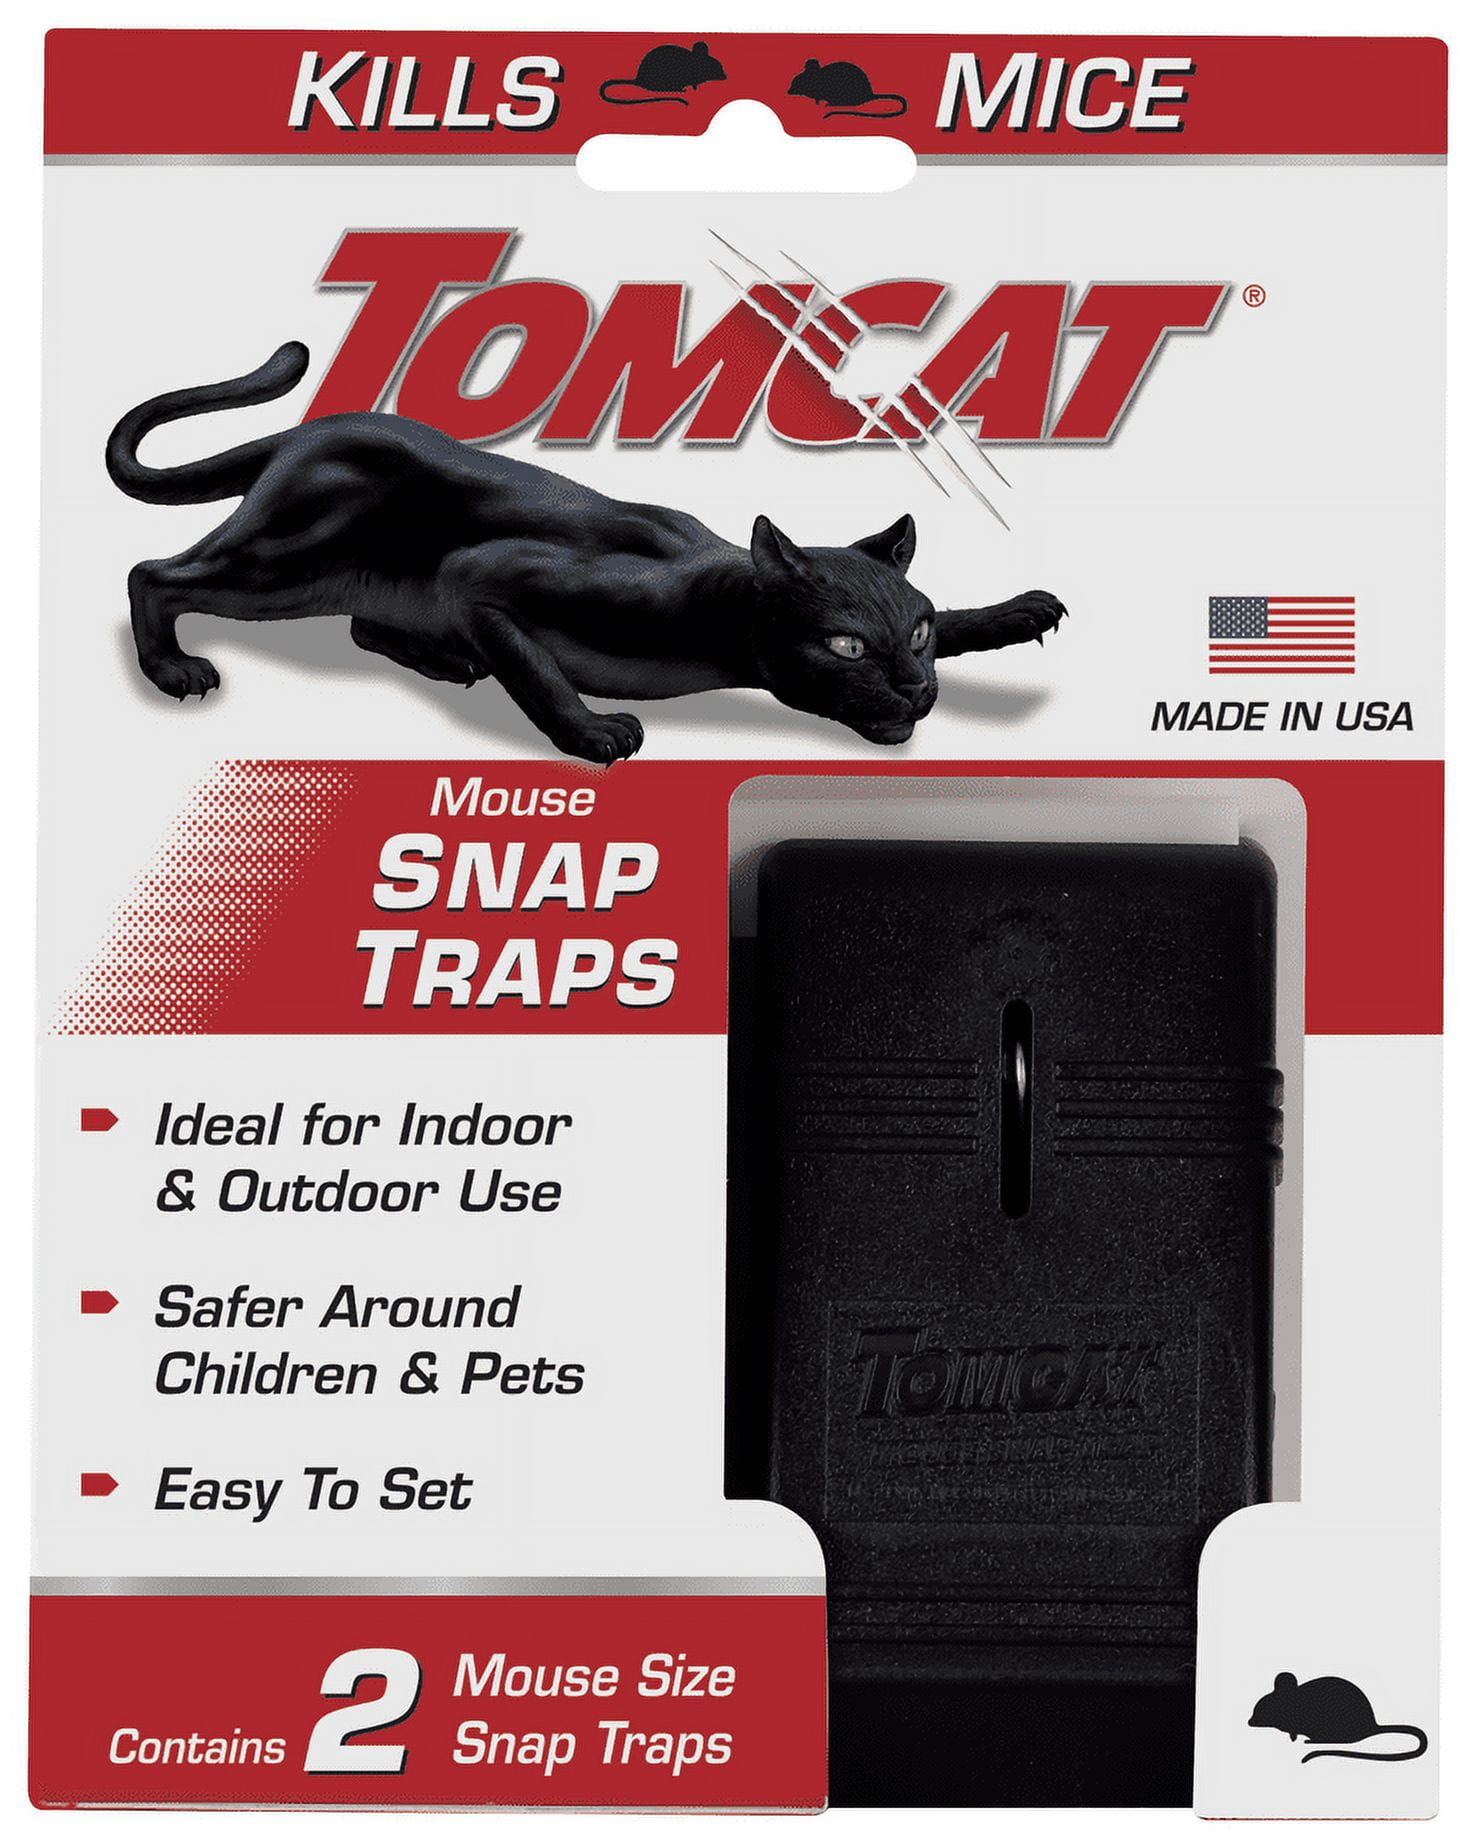 TOMCAT Press N Set Mouse Trap, Indoor or Outdoor Use Plastic, Spring-Loaded Mouse  Killer with Grab Tab, 2-Traps 3610110 - The Home Depot